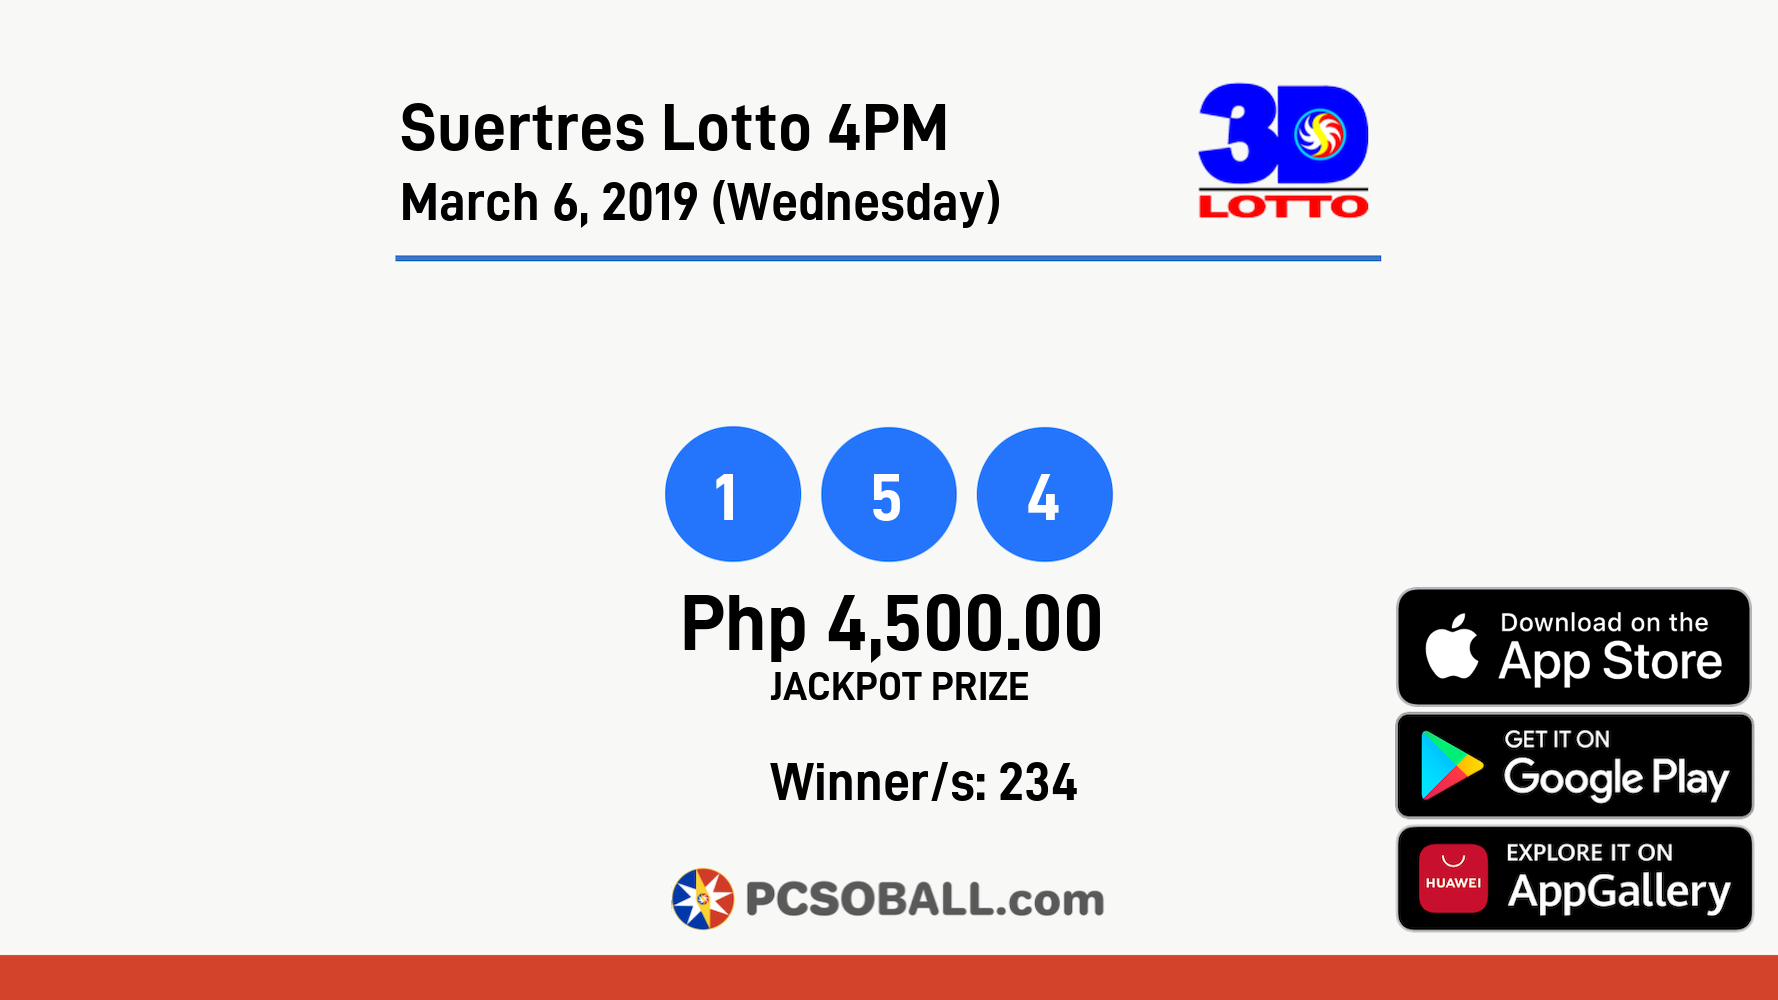 Suertres Lotto 4PM March 6, 2019 (Wednesday) Result